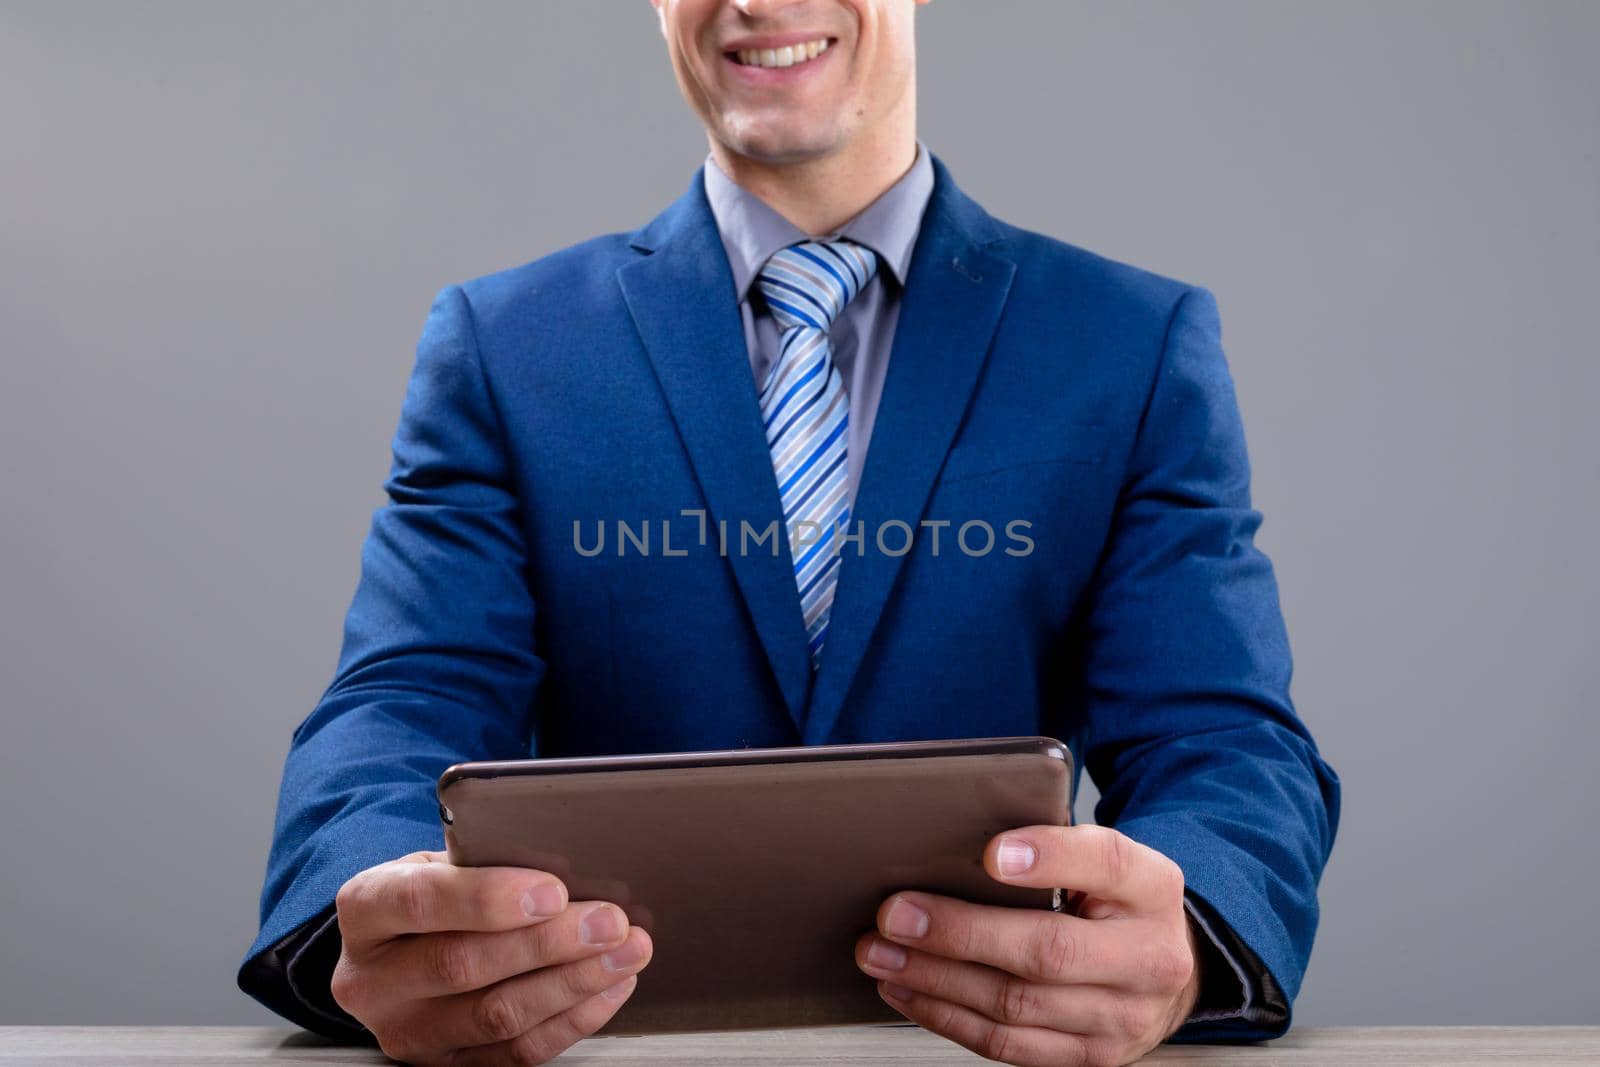 Smiling caucasian businessman using tablet, isolated on grey background. business technology, communication and growth concept.